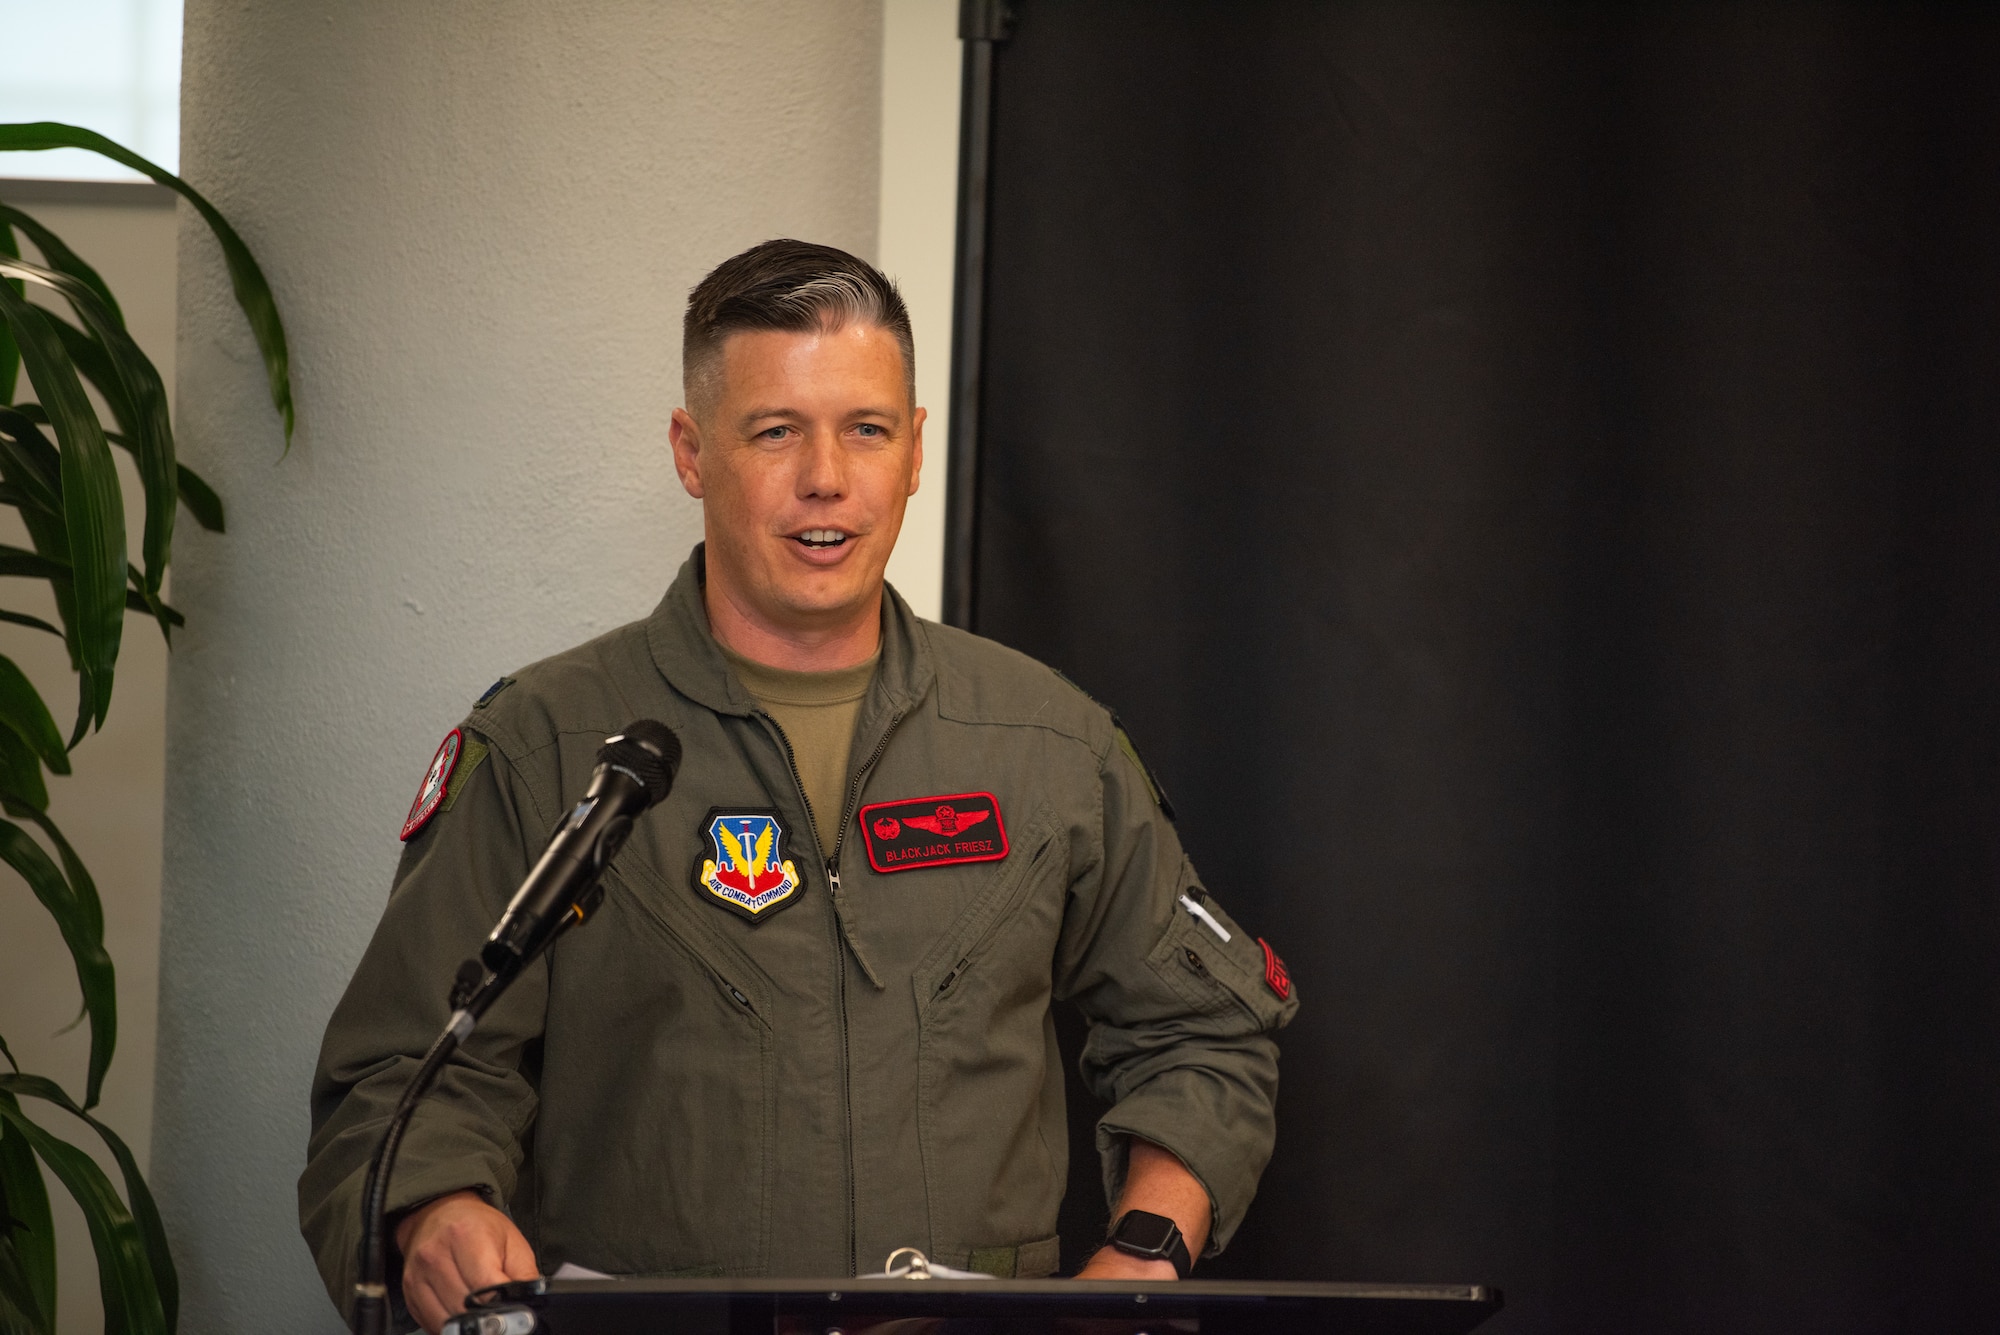 U.S. Air Force Lt. Col. Charles A. Friesz, 563rd Electronic Warfare Squadron commander, speaks during the reactivation ceremony for 563rd EWS, San Antonio, Texas, April 25, 2024. Friesz is the first commander of the unit since its deactivation in 2010. The 563rd EWS was previously dedicated to electronic warfare and combat system officer training and will now perform software development to support electromagnetic warfare capabilities for the Air Force. (U.S. Air Force photo by Jarrod M. Vickers)